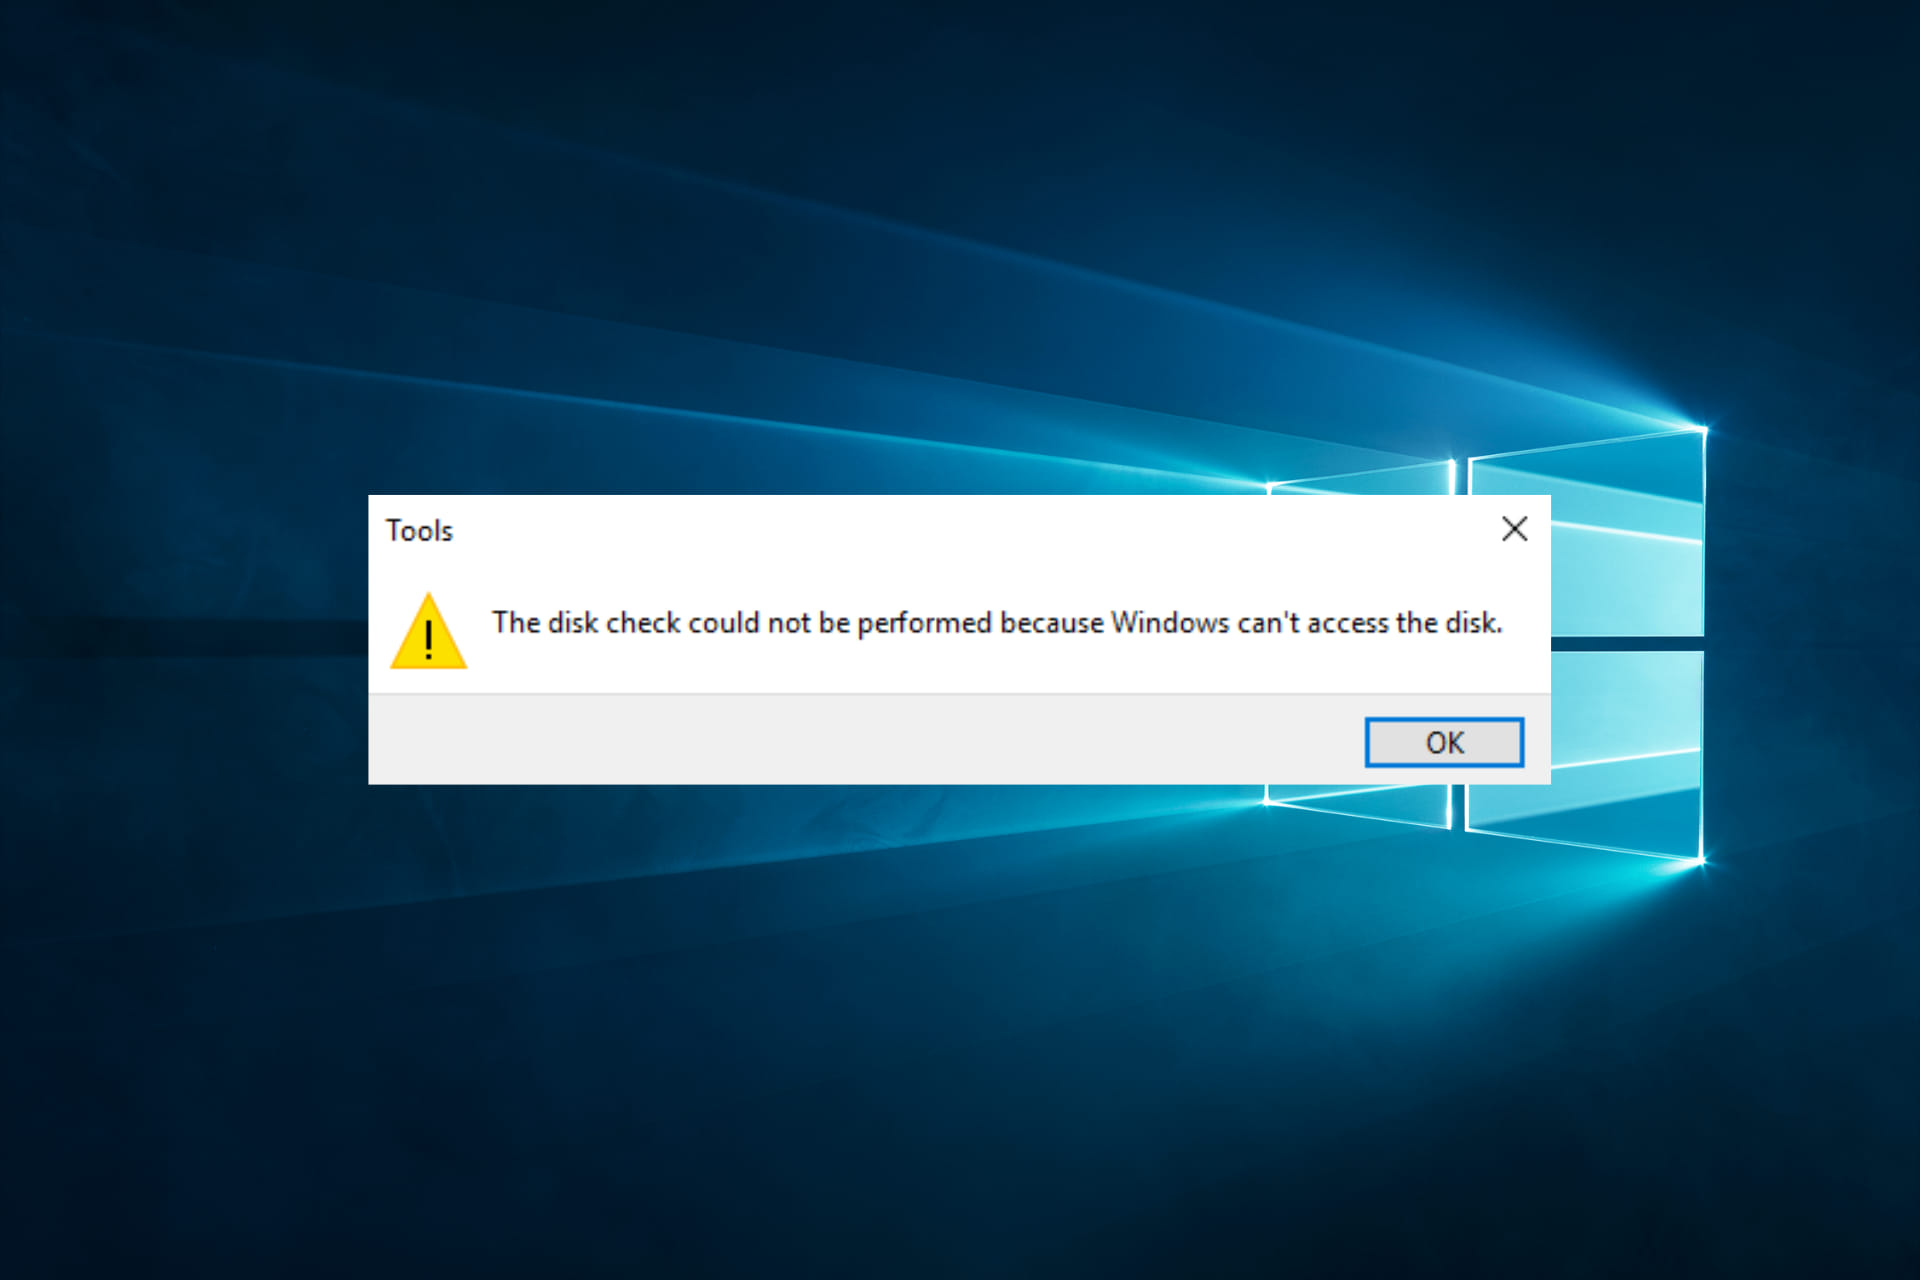 windows cannot access the disk